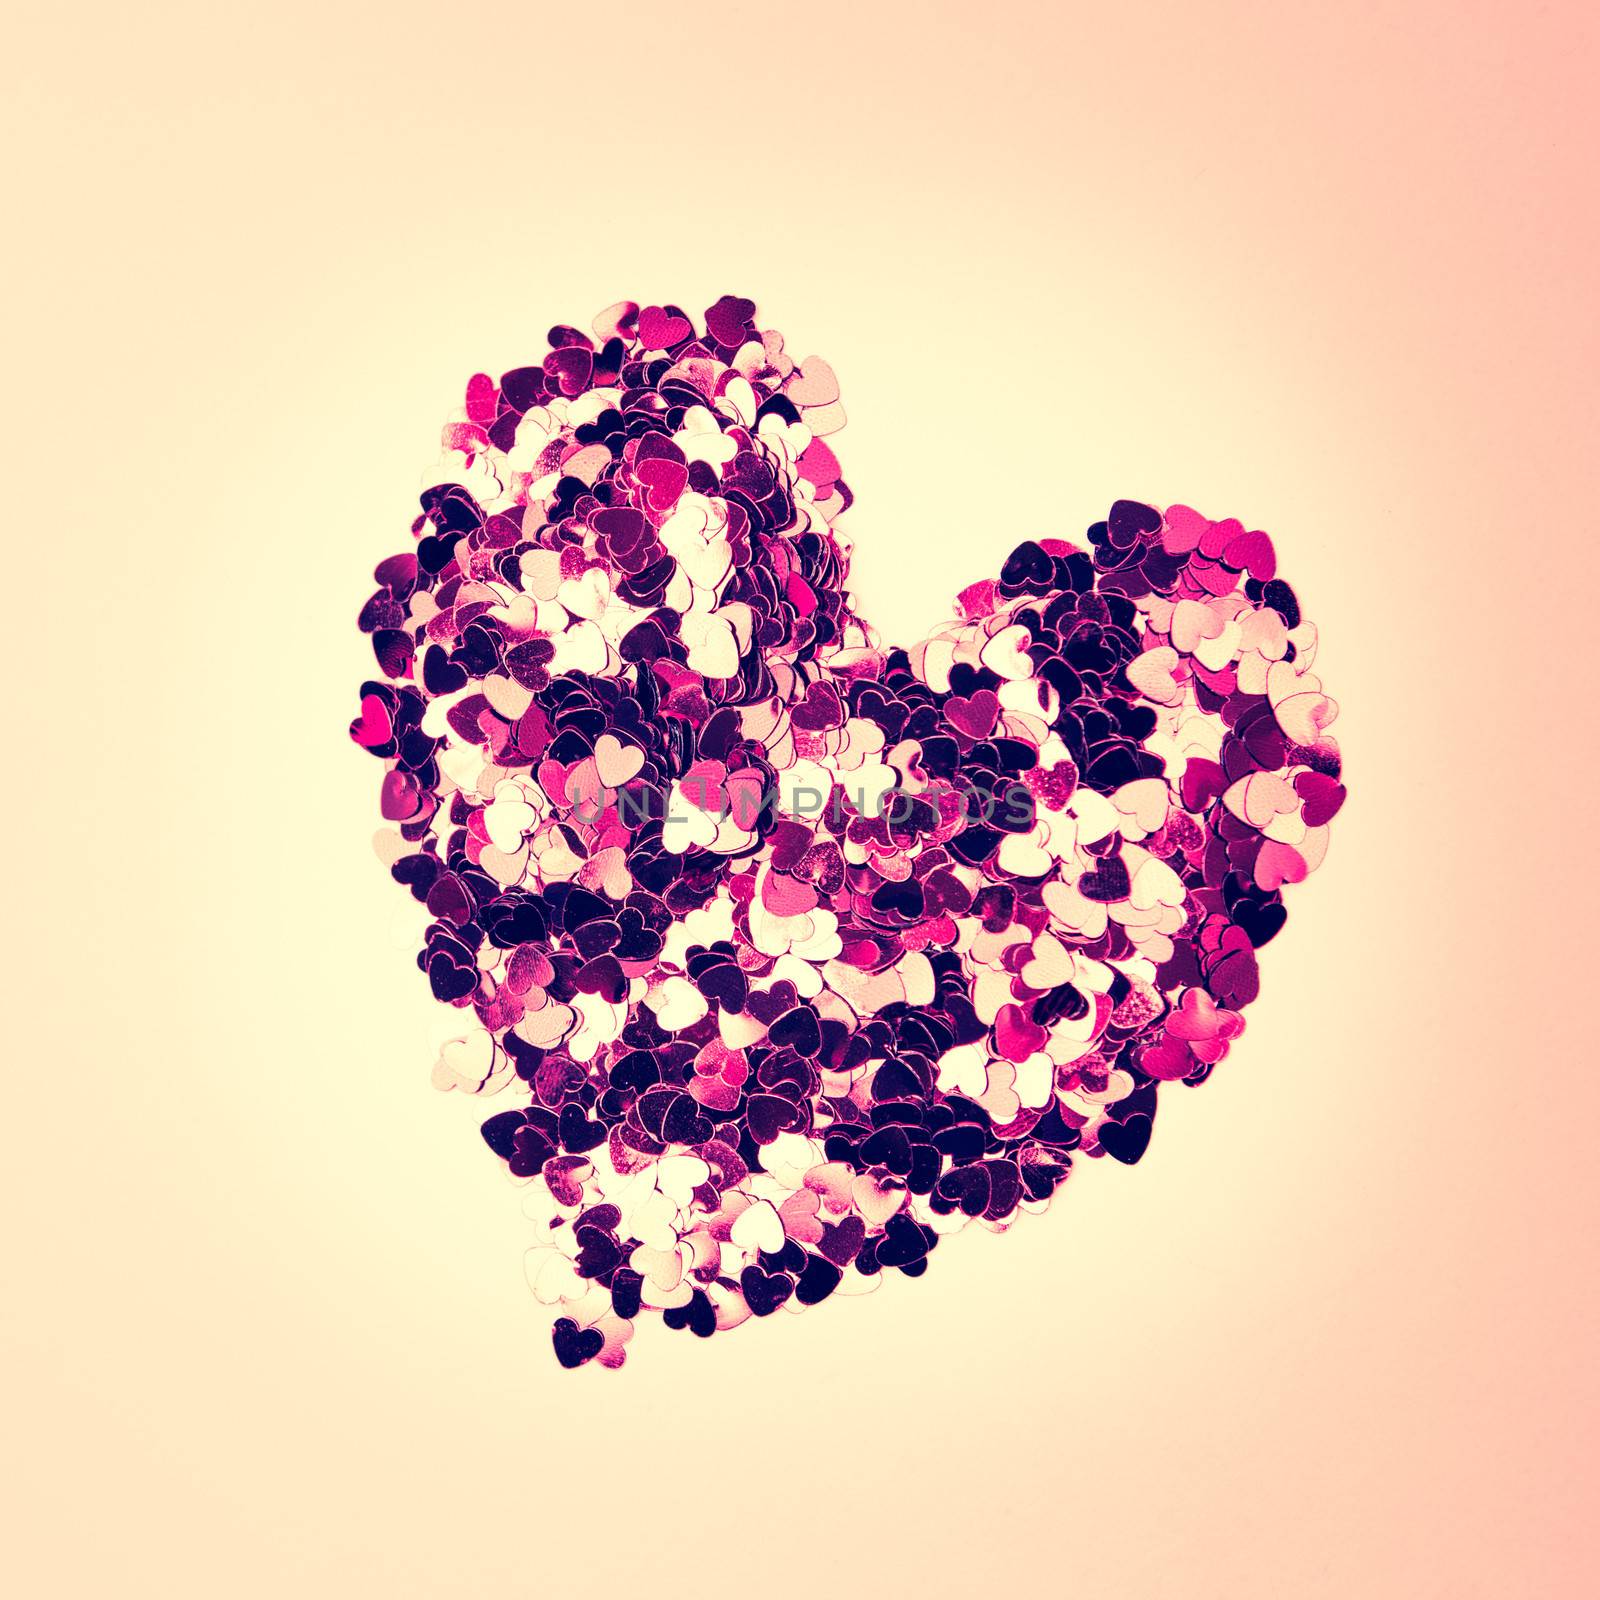 Pink confetti in heart shape on neutral background